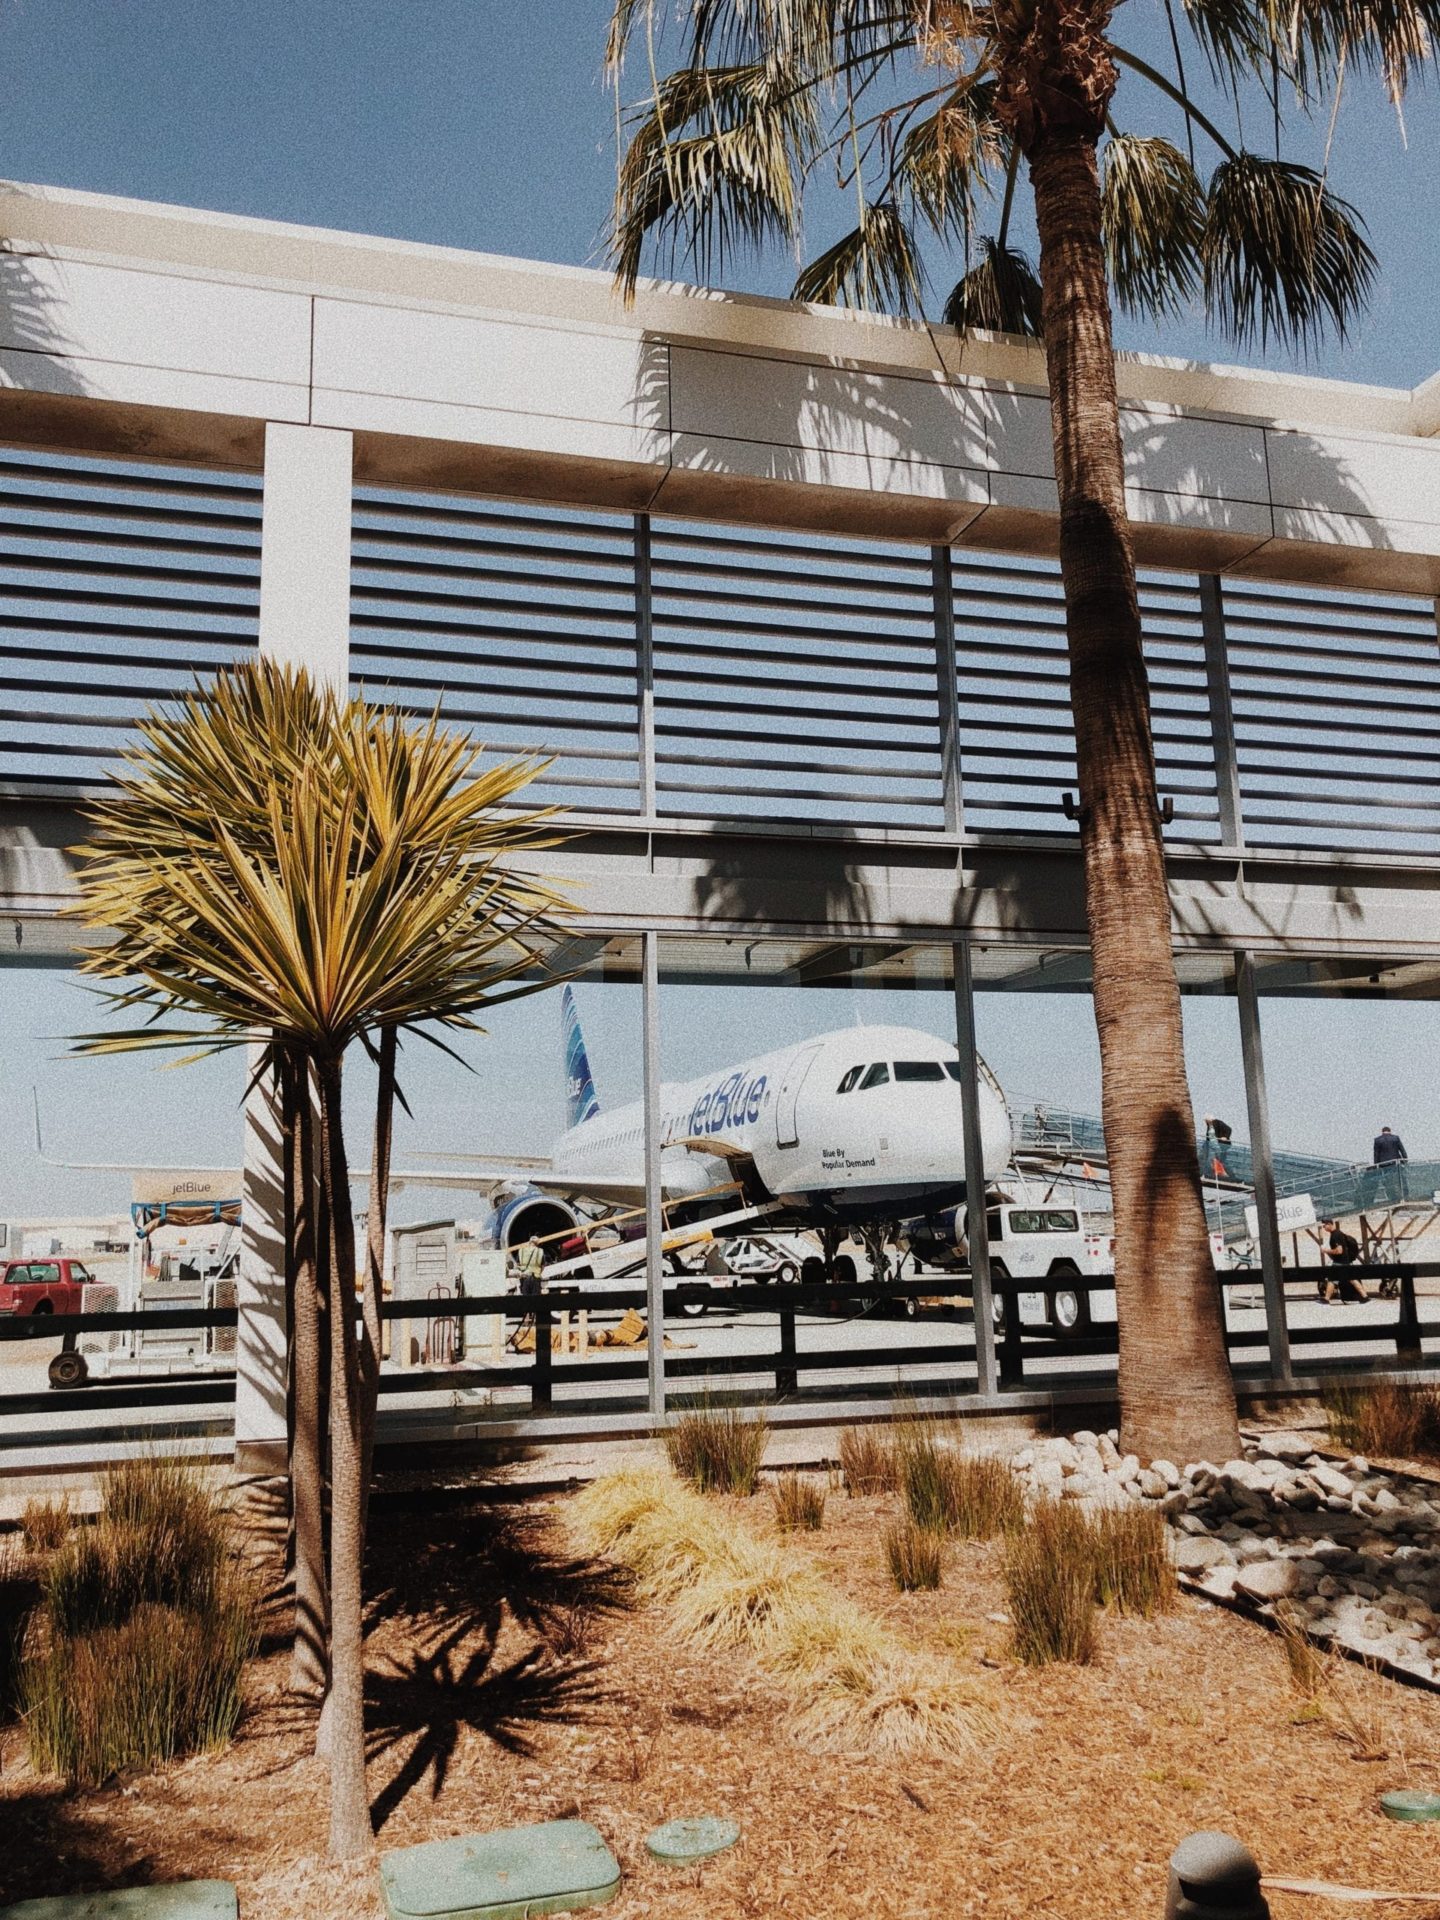 Airport Hacks Every Traveler Should Know